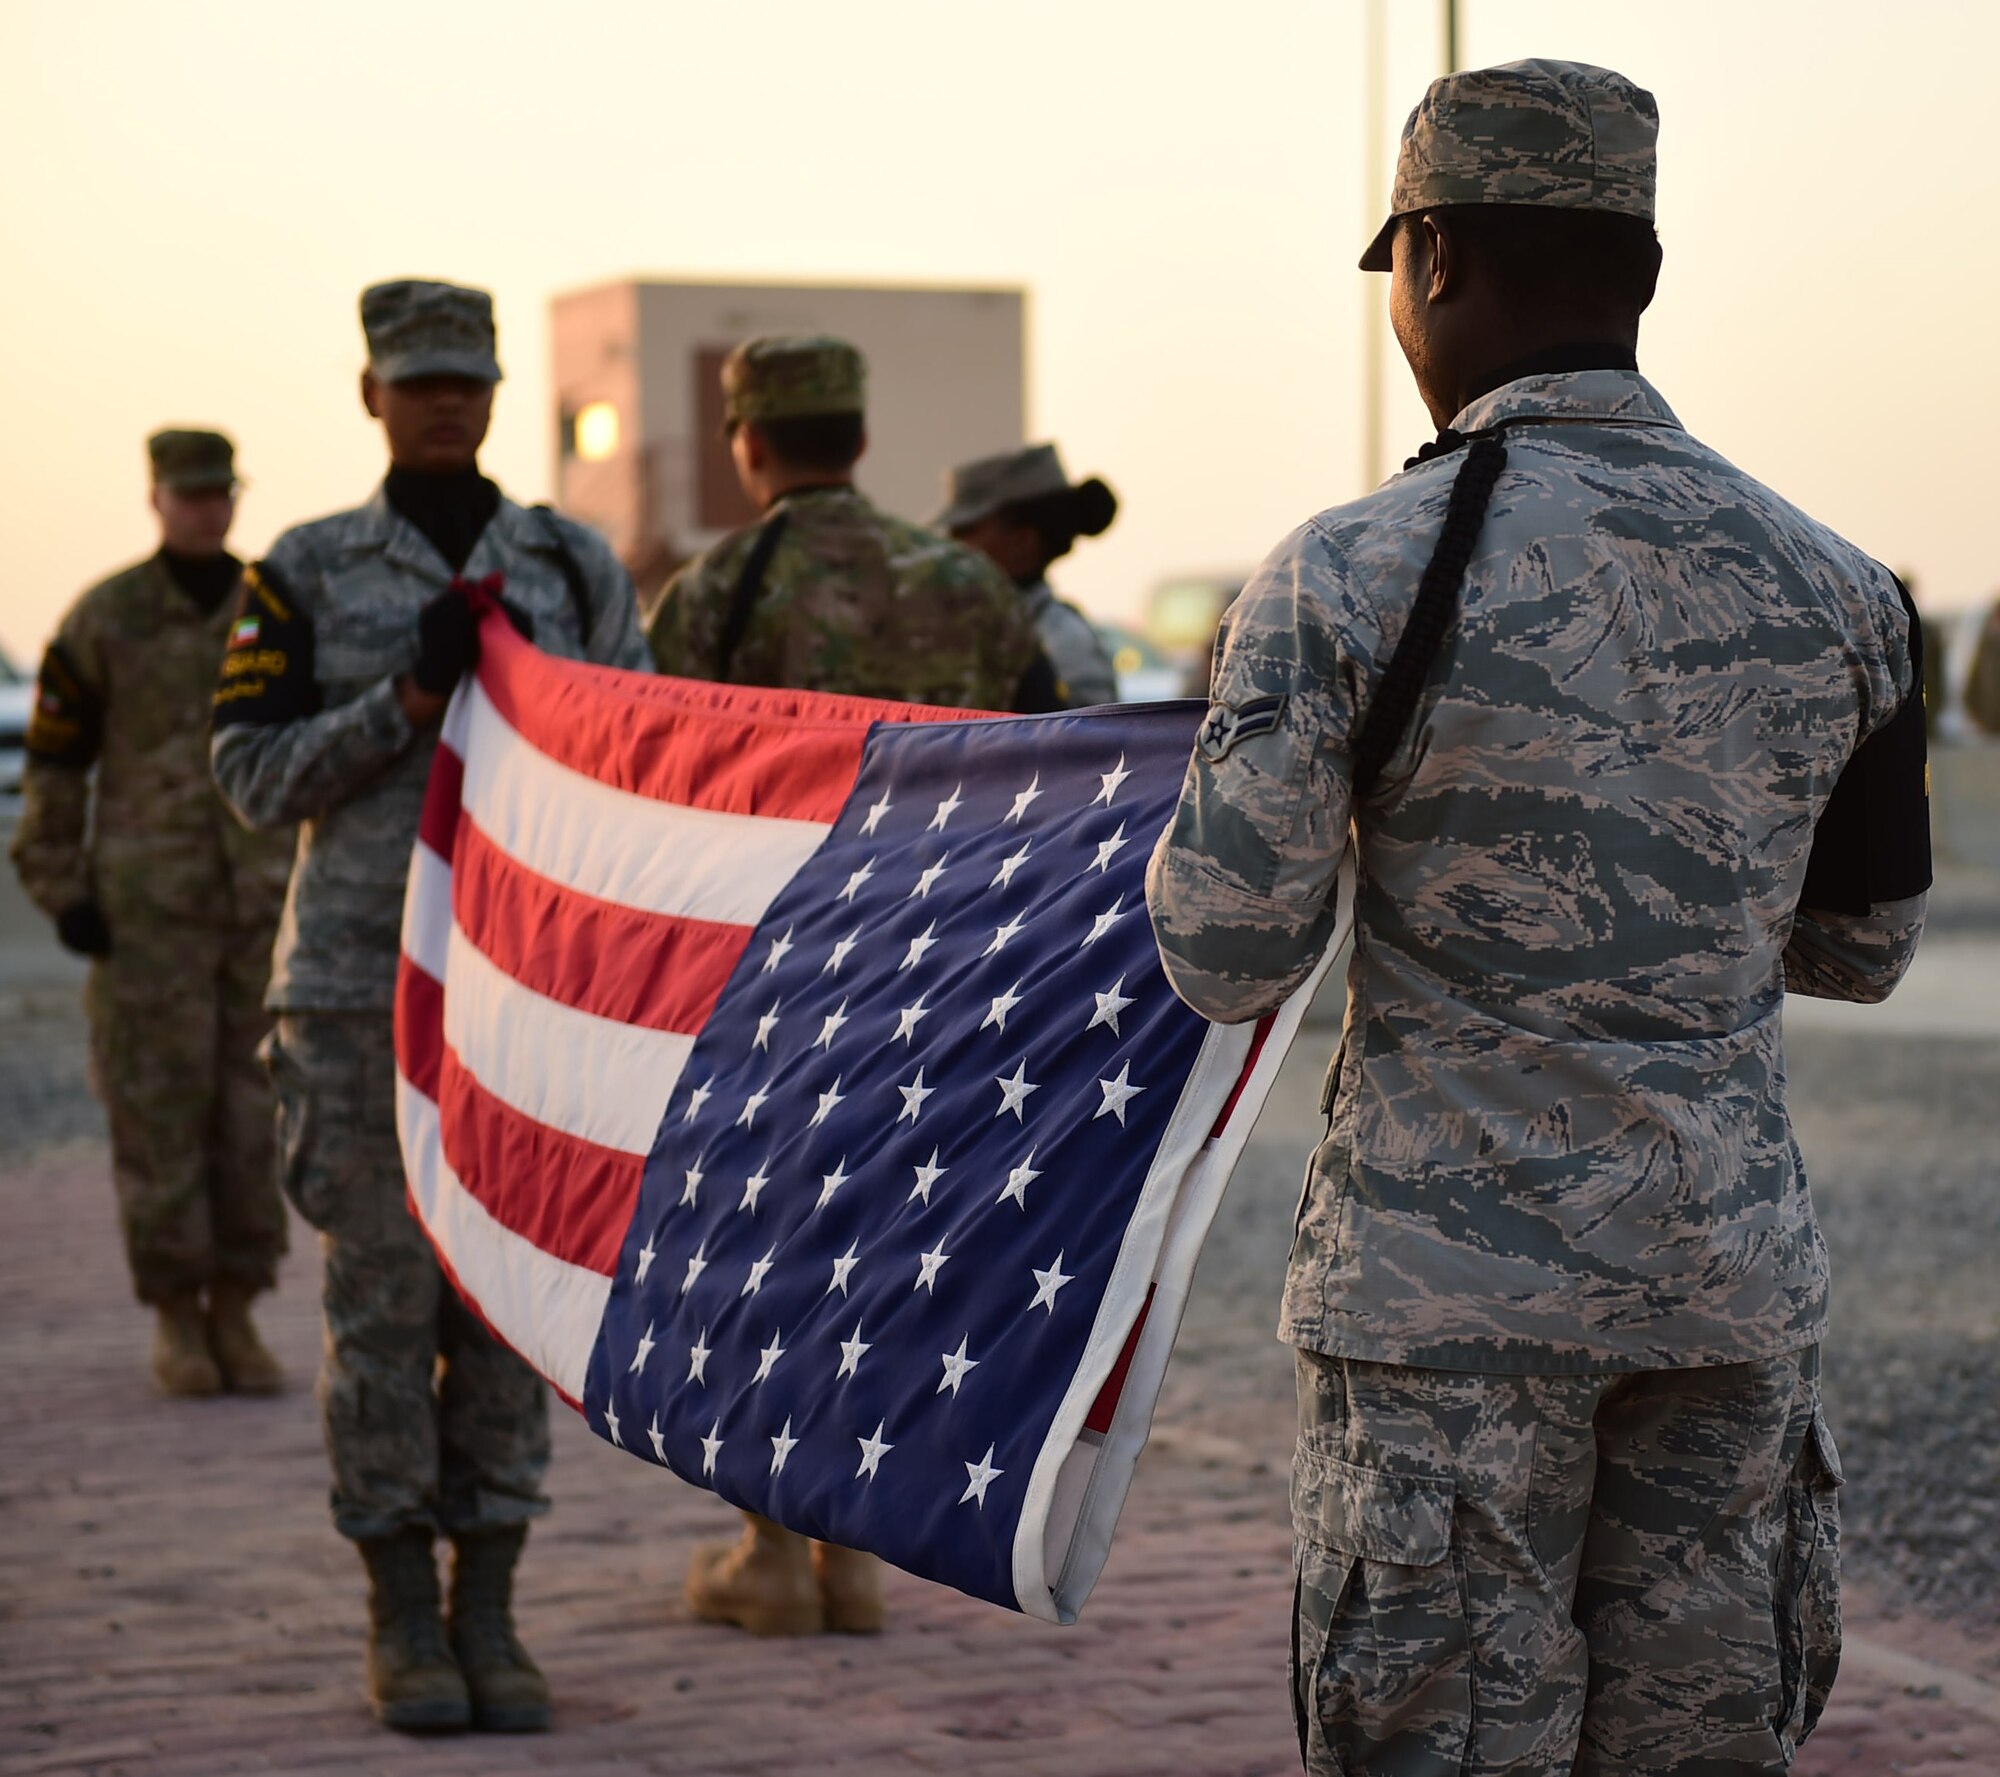 Airmen from the 386th Expeditionary Medical Group participate in the first-ever Raymond Weeks’ Veteran’s Day Memorial Challenge at an undisclosed location in Southwest Asia, Nov. 11, 2015. The challenge was named after a World War II veteran who petitioned to have what was then known as Armistice Day, which honors those who lost their lives while serving in the Armed Forces, expanded to honor all Veterans. (U.S. Air Force photo by Staff Sgt. Jerilyn Quintanilla)  